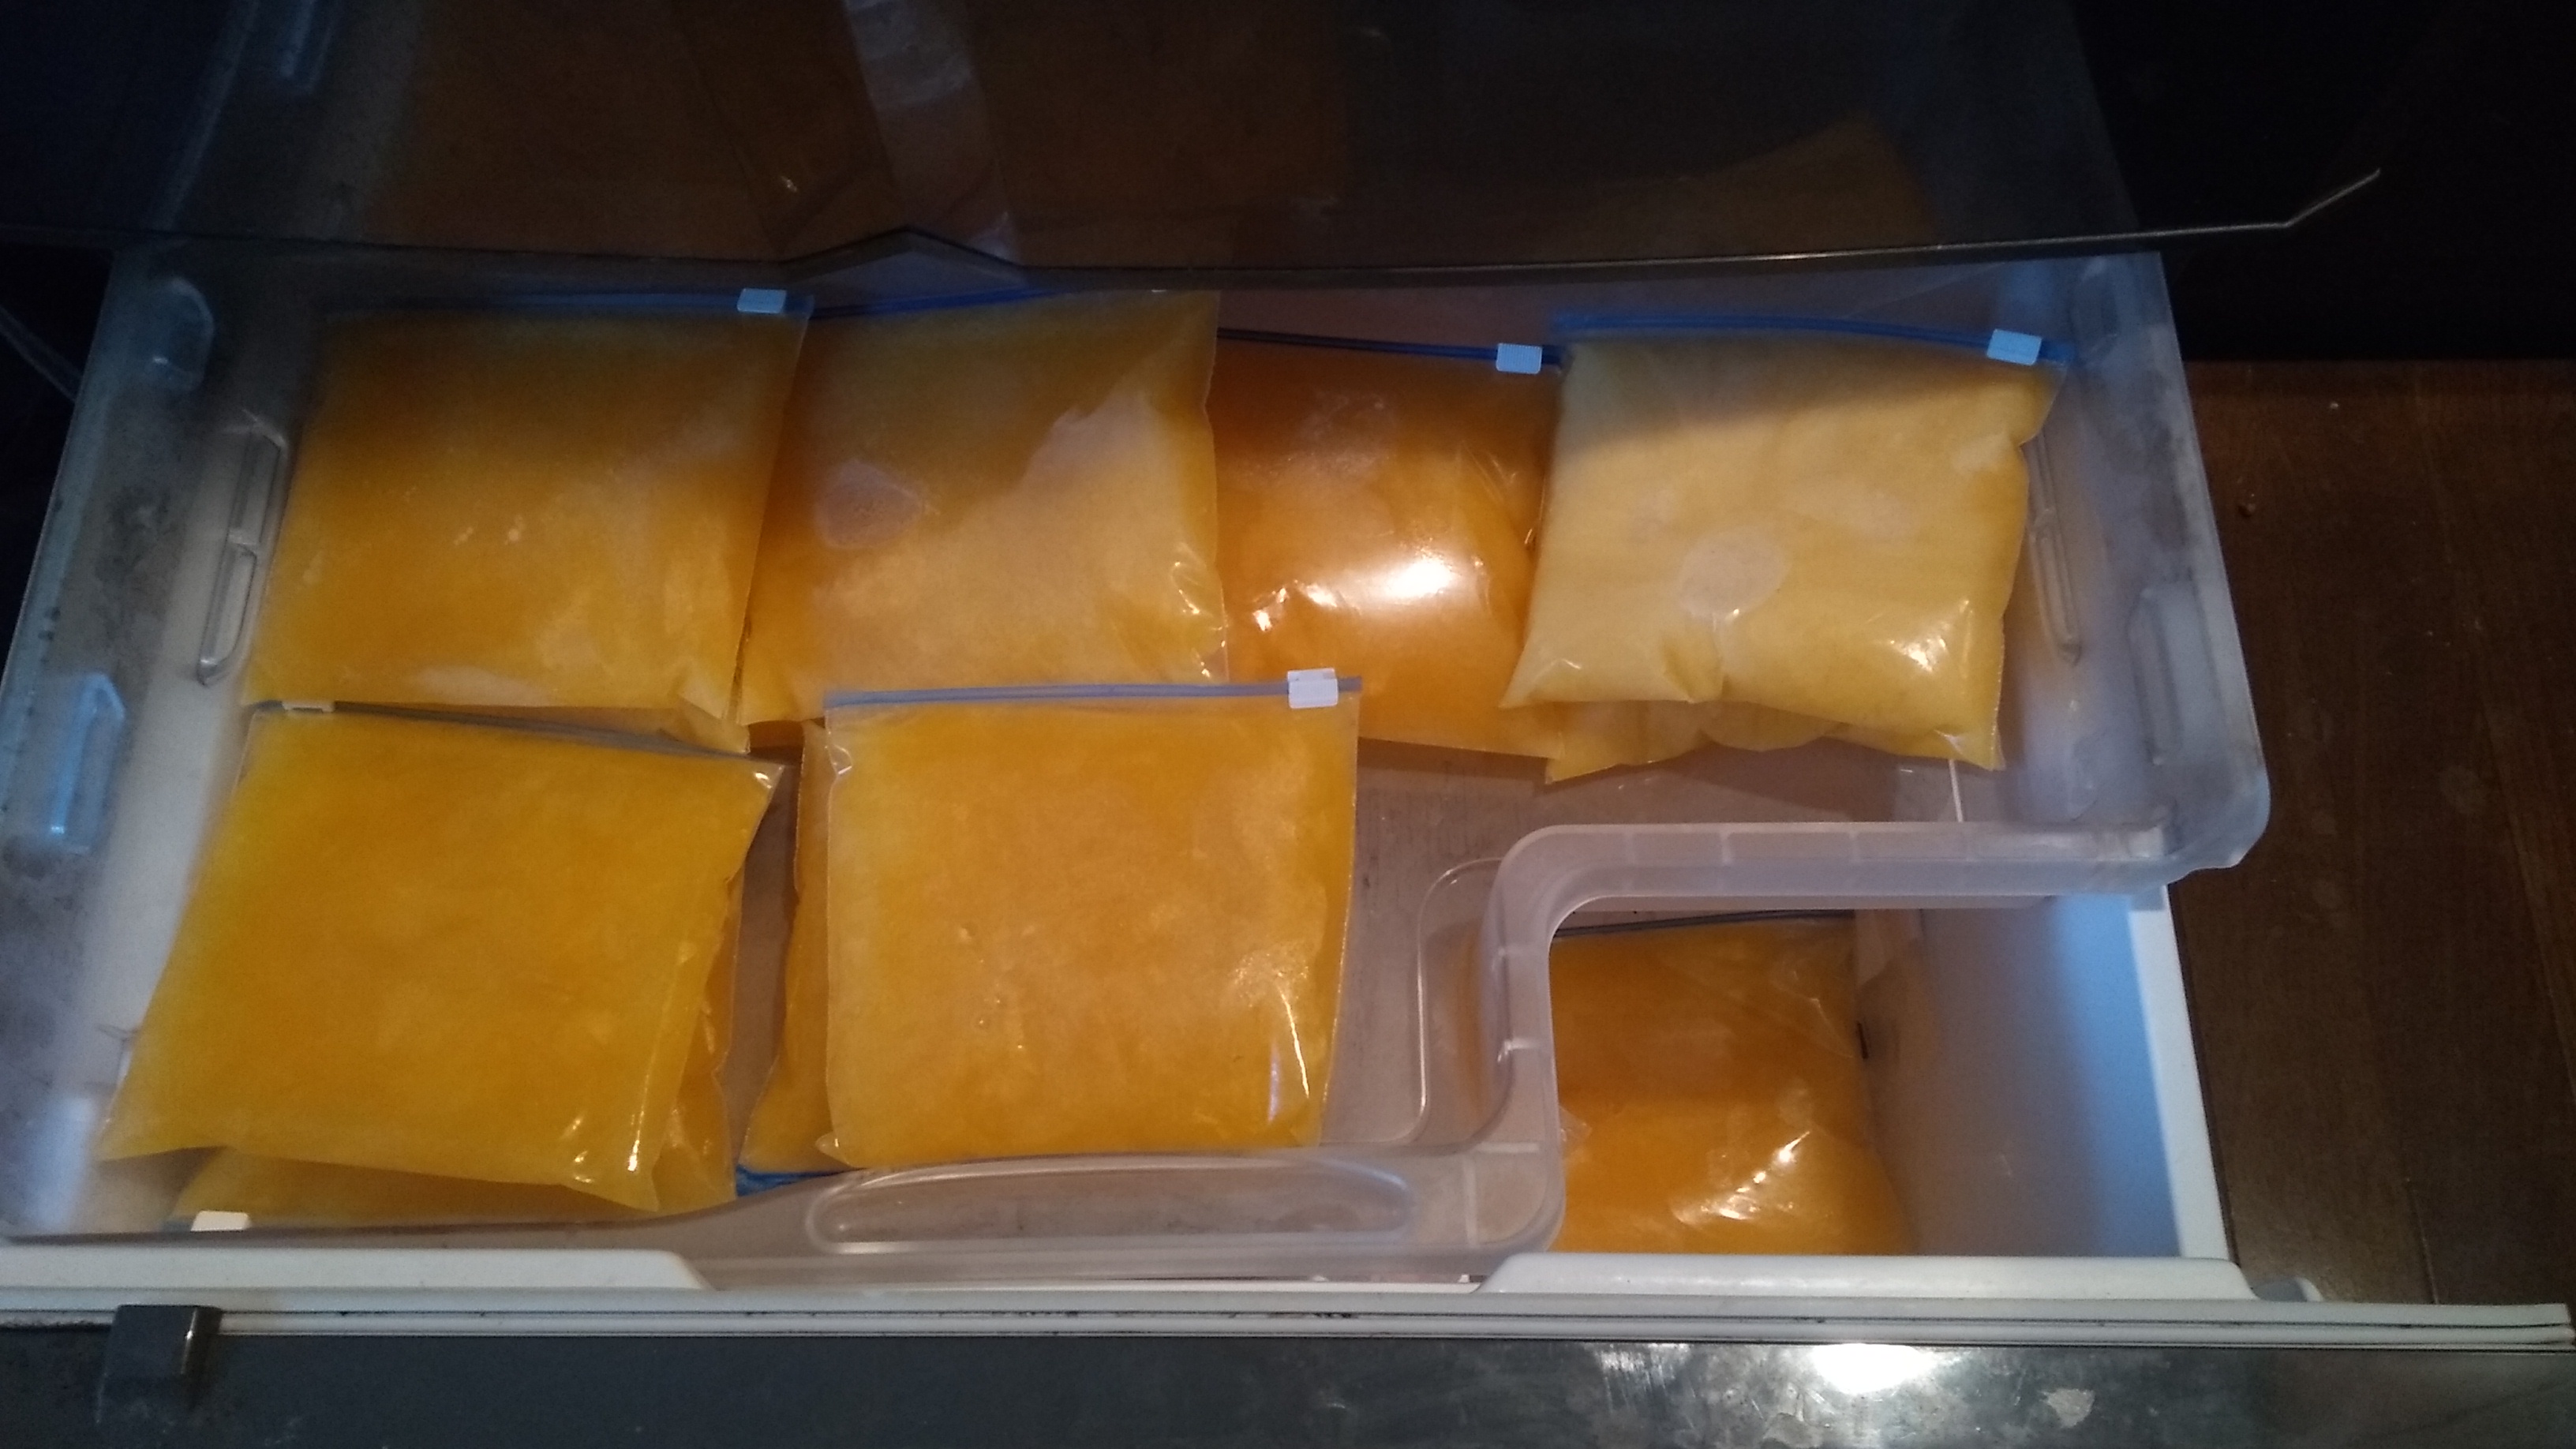 Top view of the top tray of a refrigerator freezer compartment, blanketed entirely in siplock bags filled with frozen shiikuasa juice.